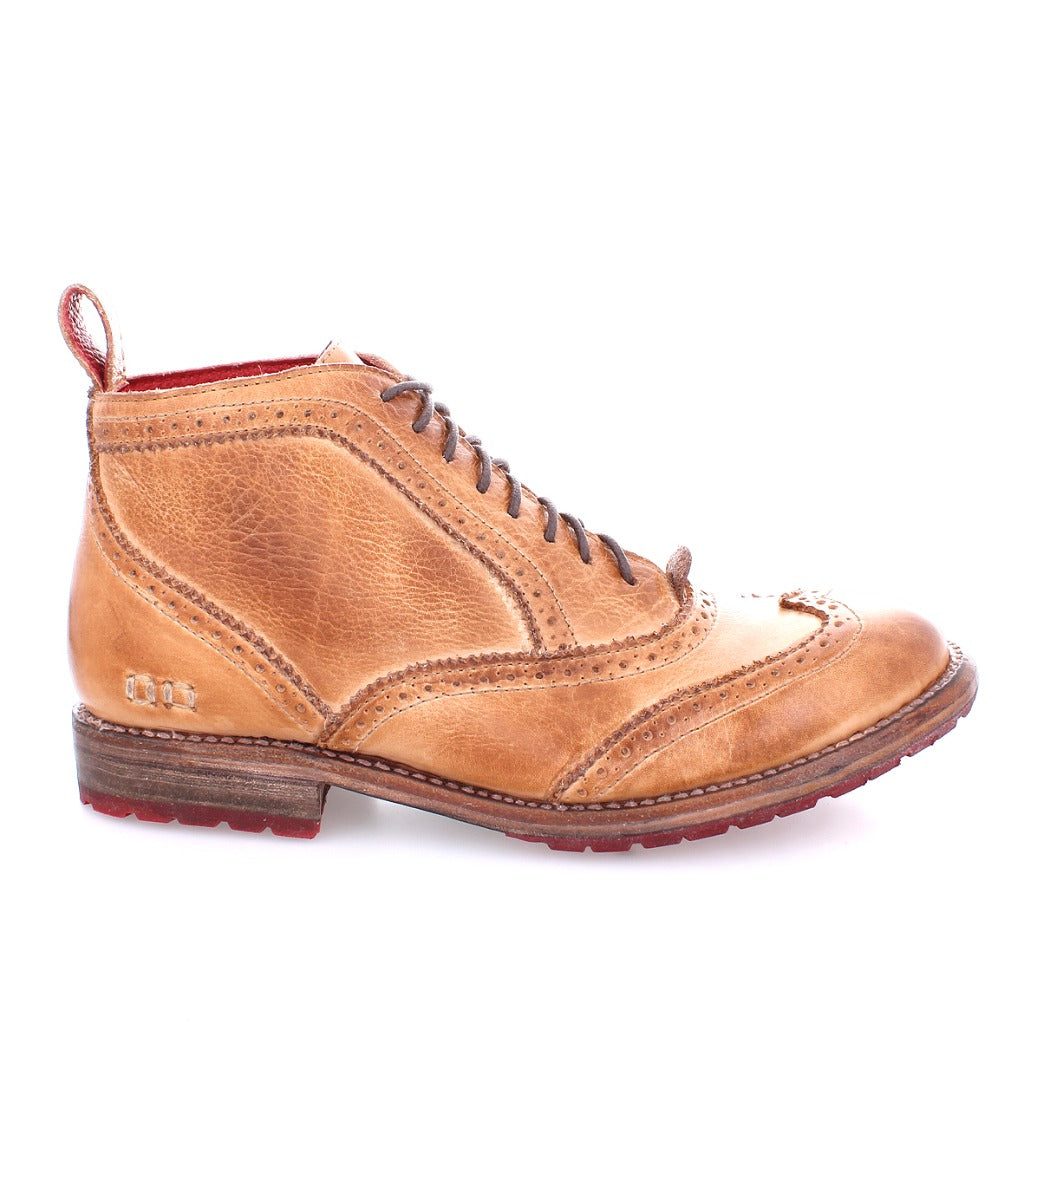 A women's tan leather wingtip boot named "Sally" by Bed Stu.